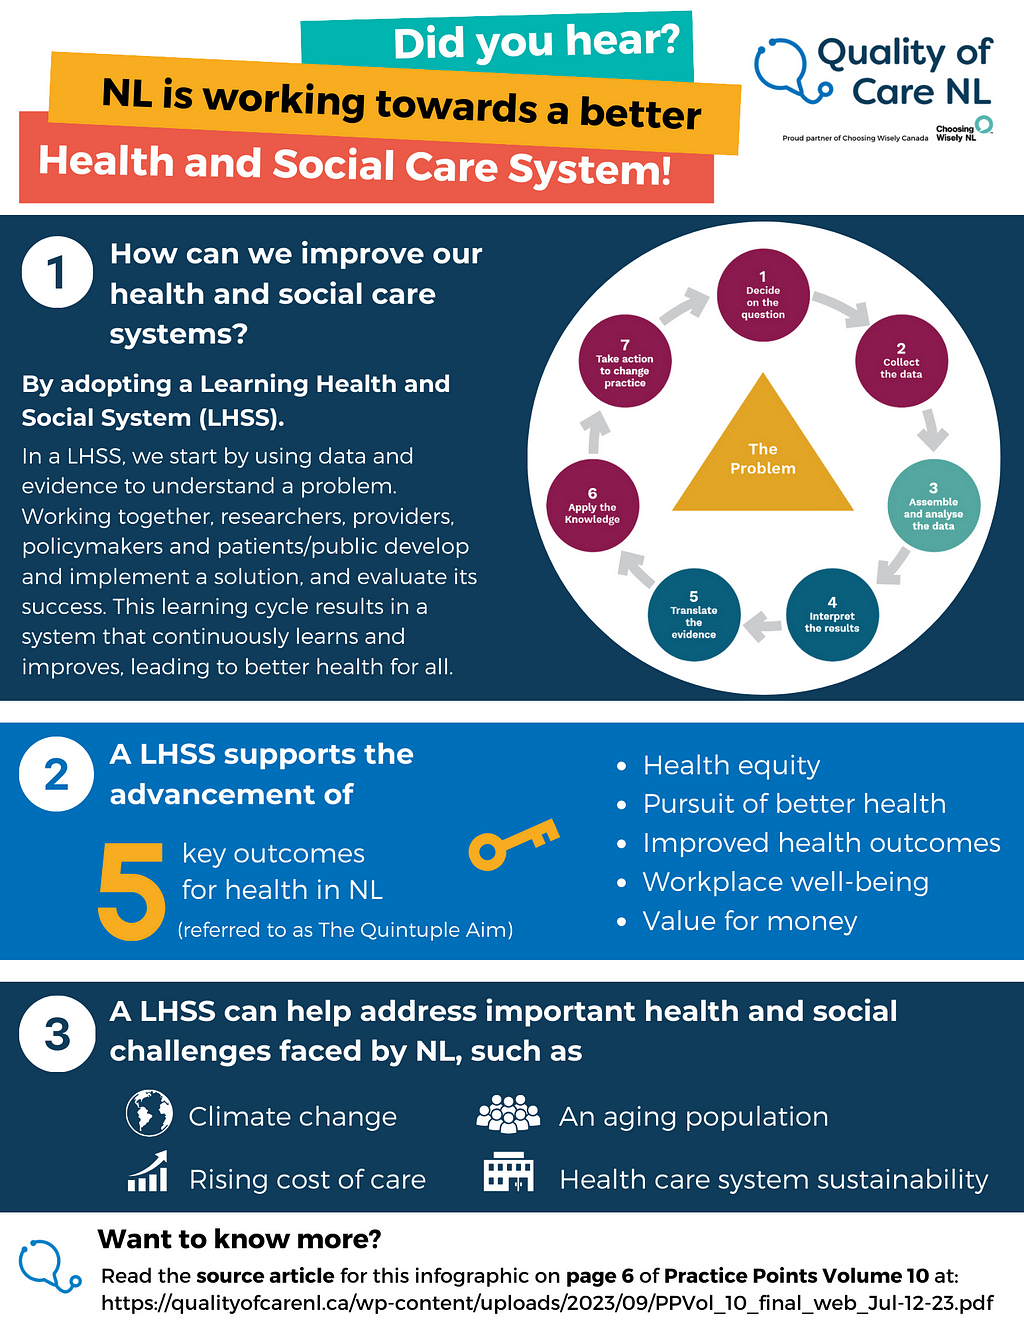 Infographic titled: Did you hear? NL is working towards a better health and social care system.